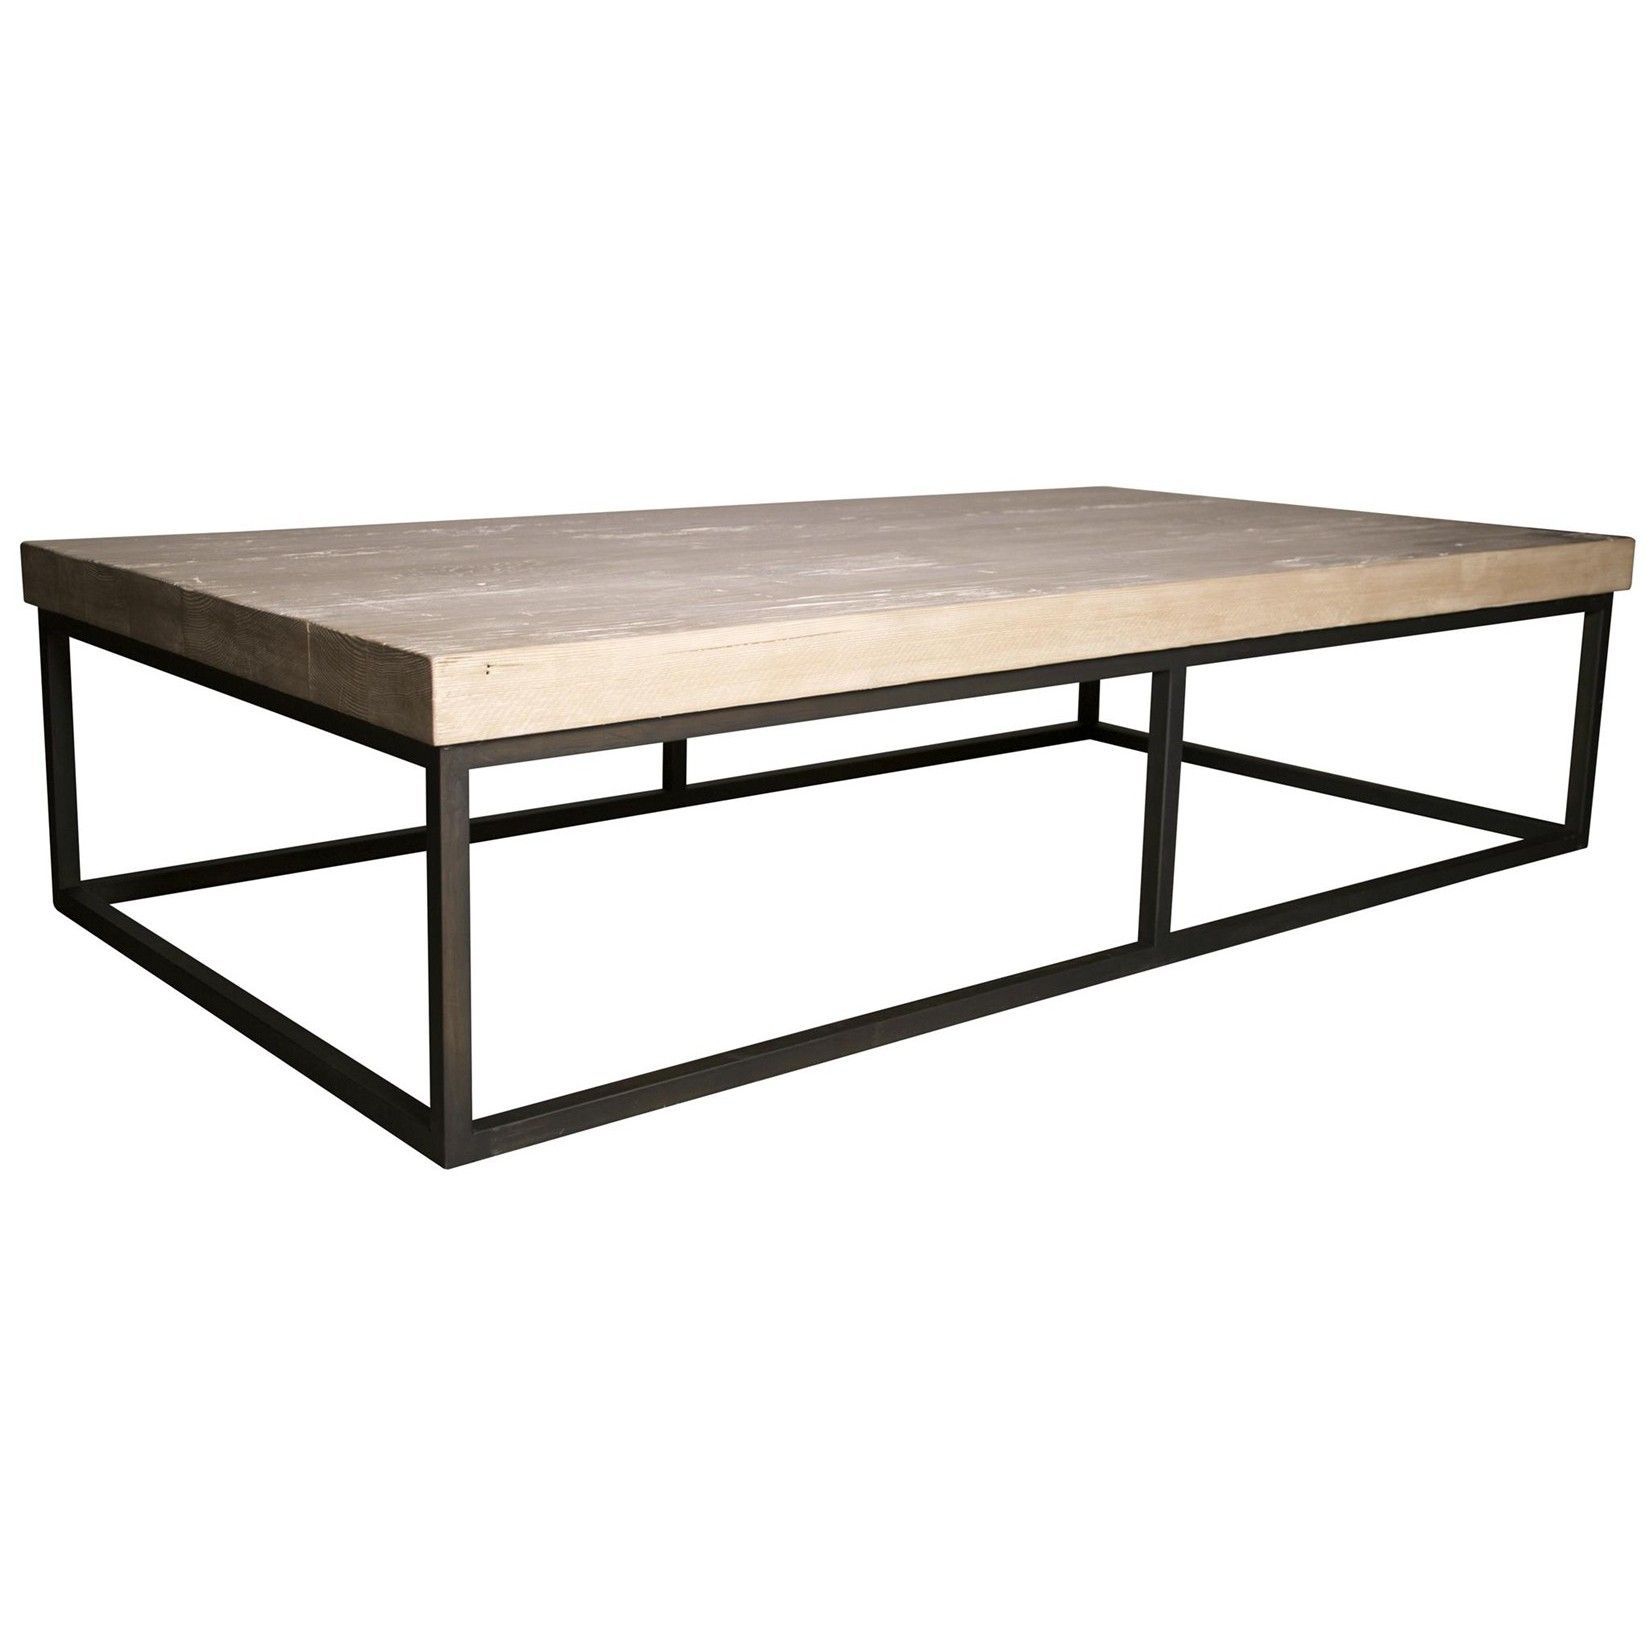 Cfc Marin Coffee Table, Rl Top | Family Room Likes | Pinterest Regarding Elke Marble Console Tables With Polished Aluminum Base (View 26 of 30)